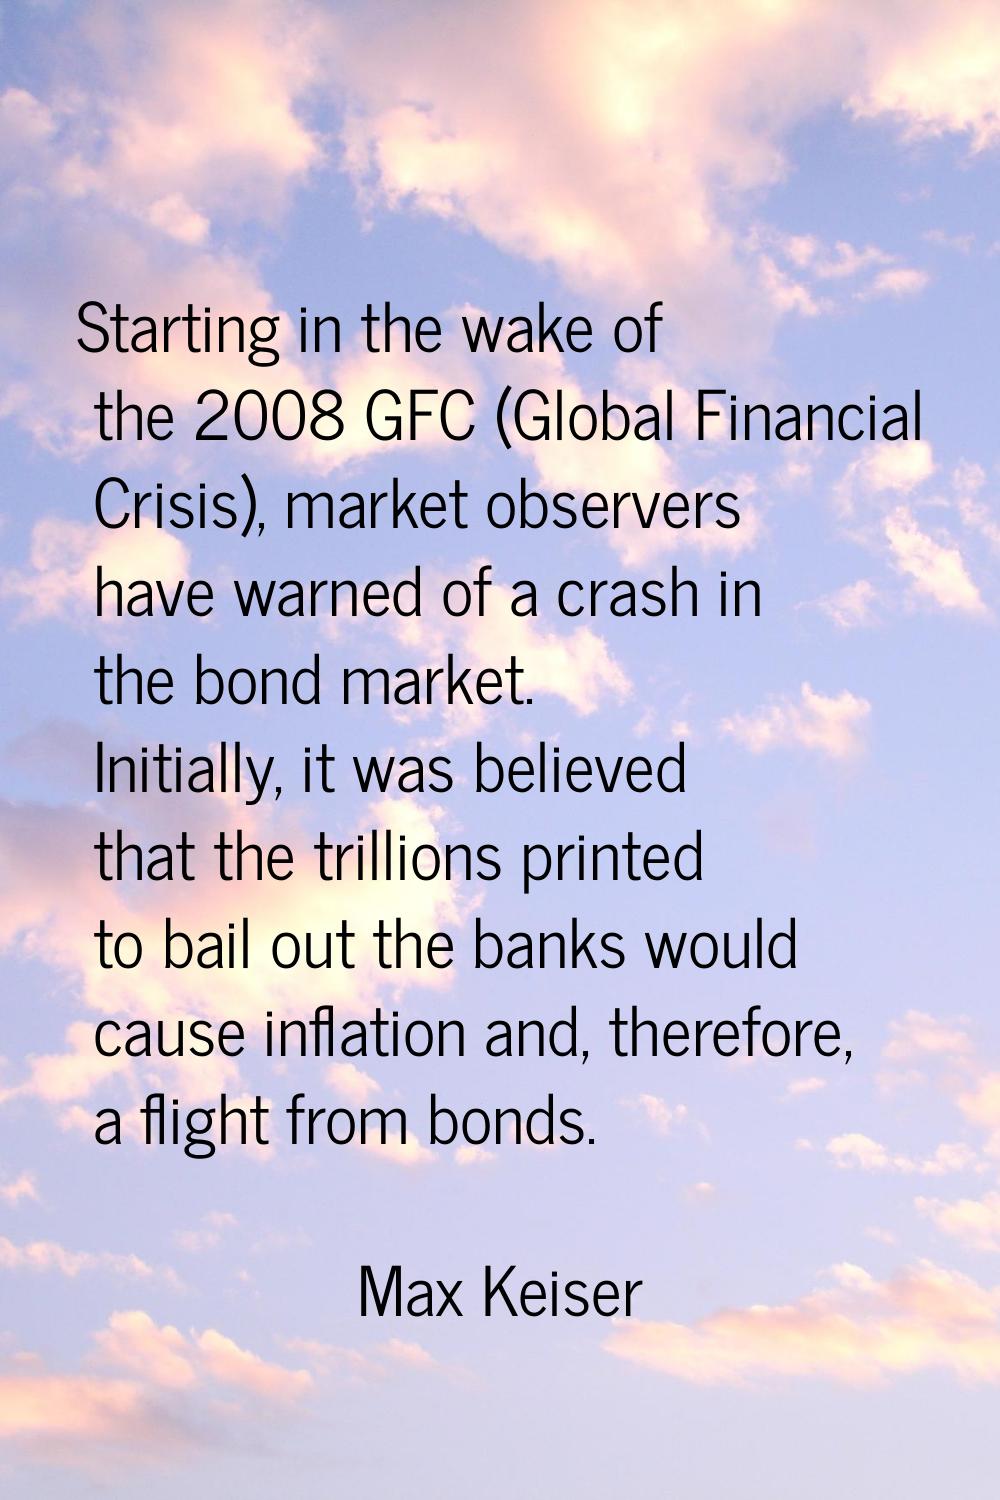 Starting in the wake of the 2008 GFC (Global Financial Crisis), market observers have warned of a c